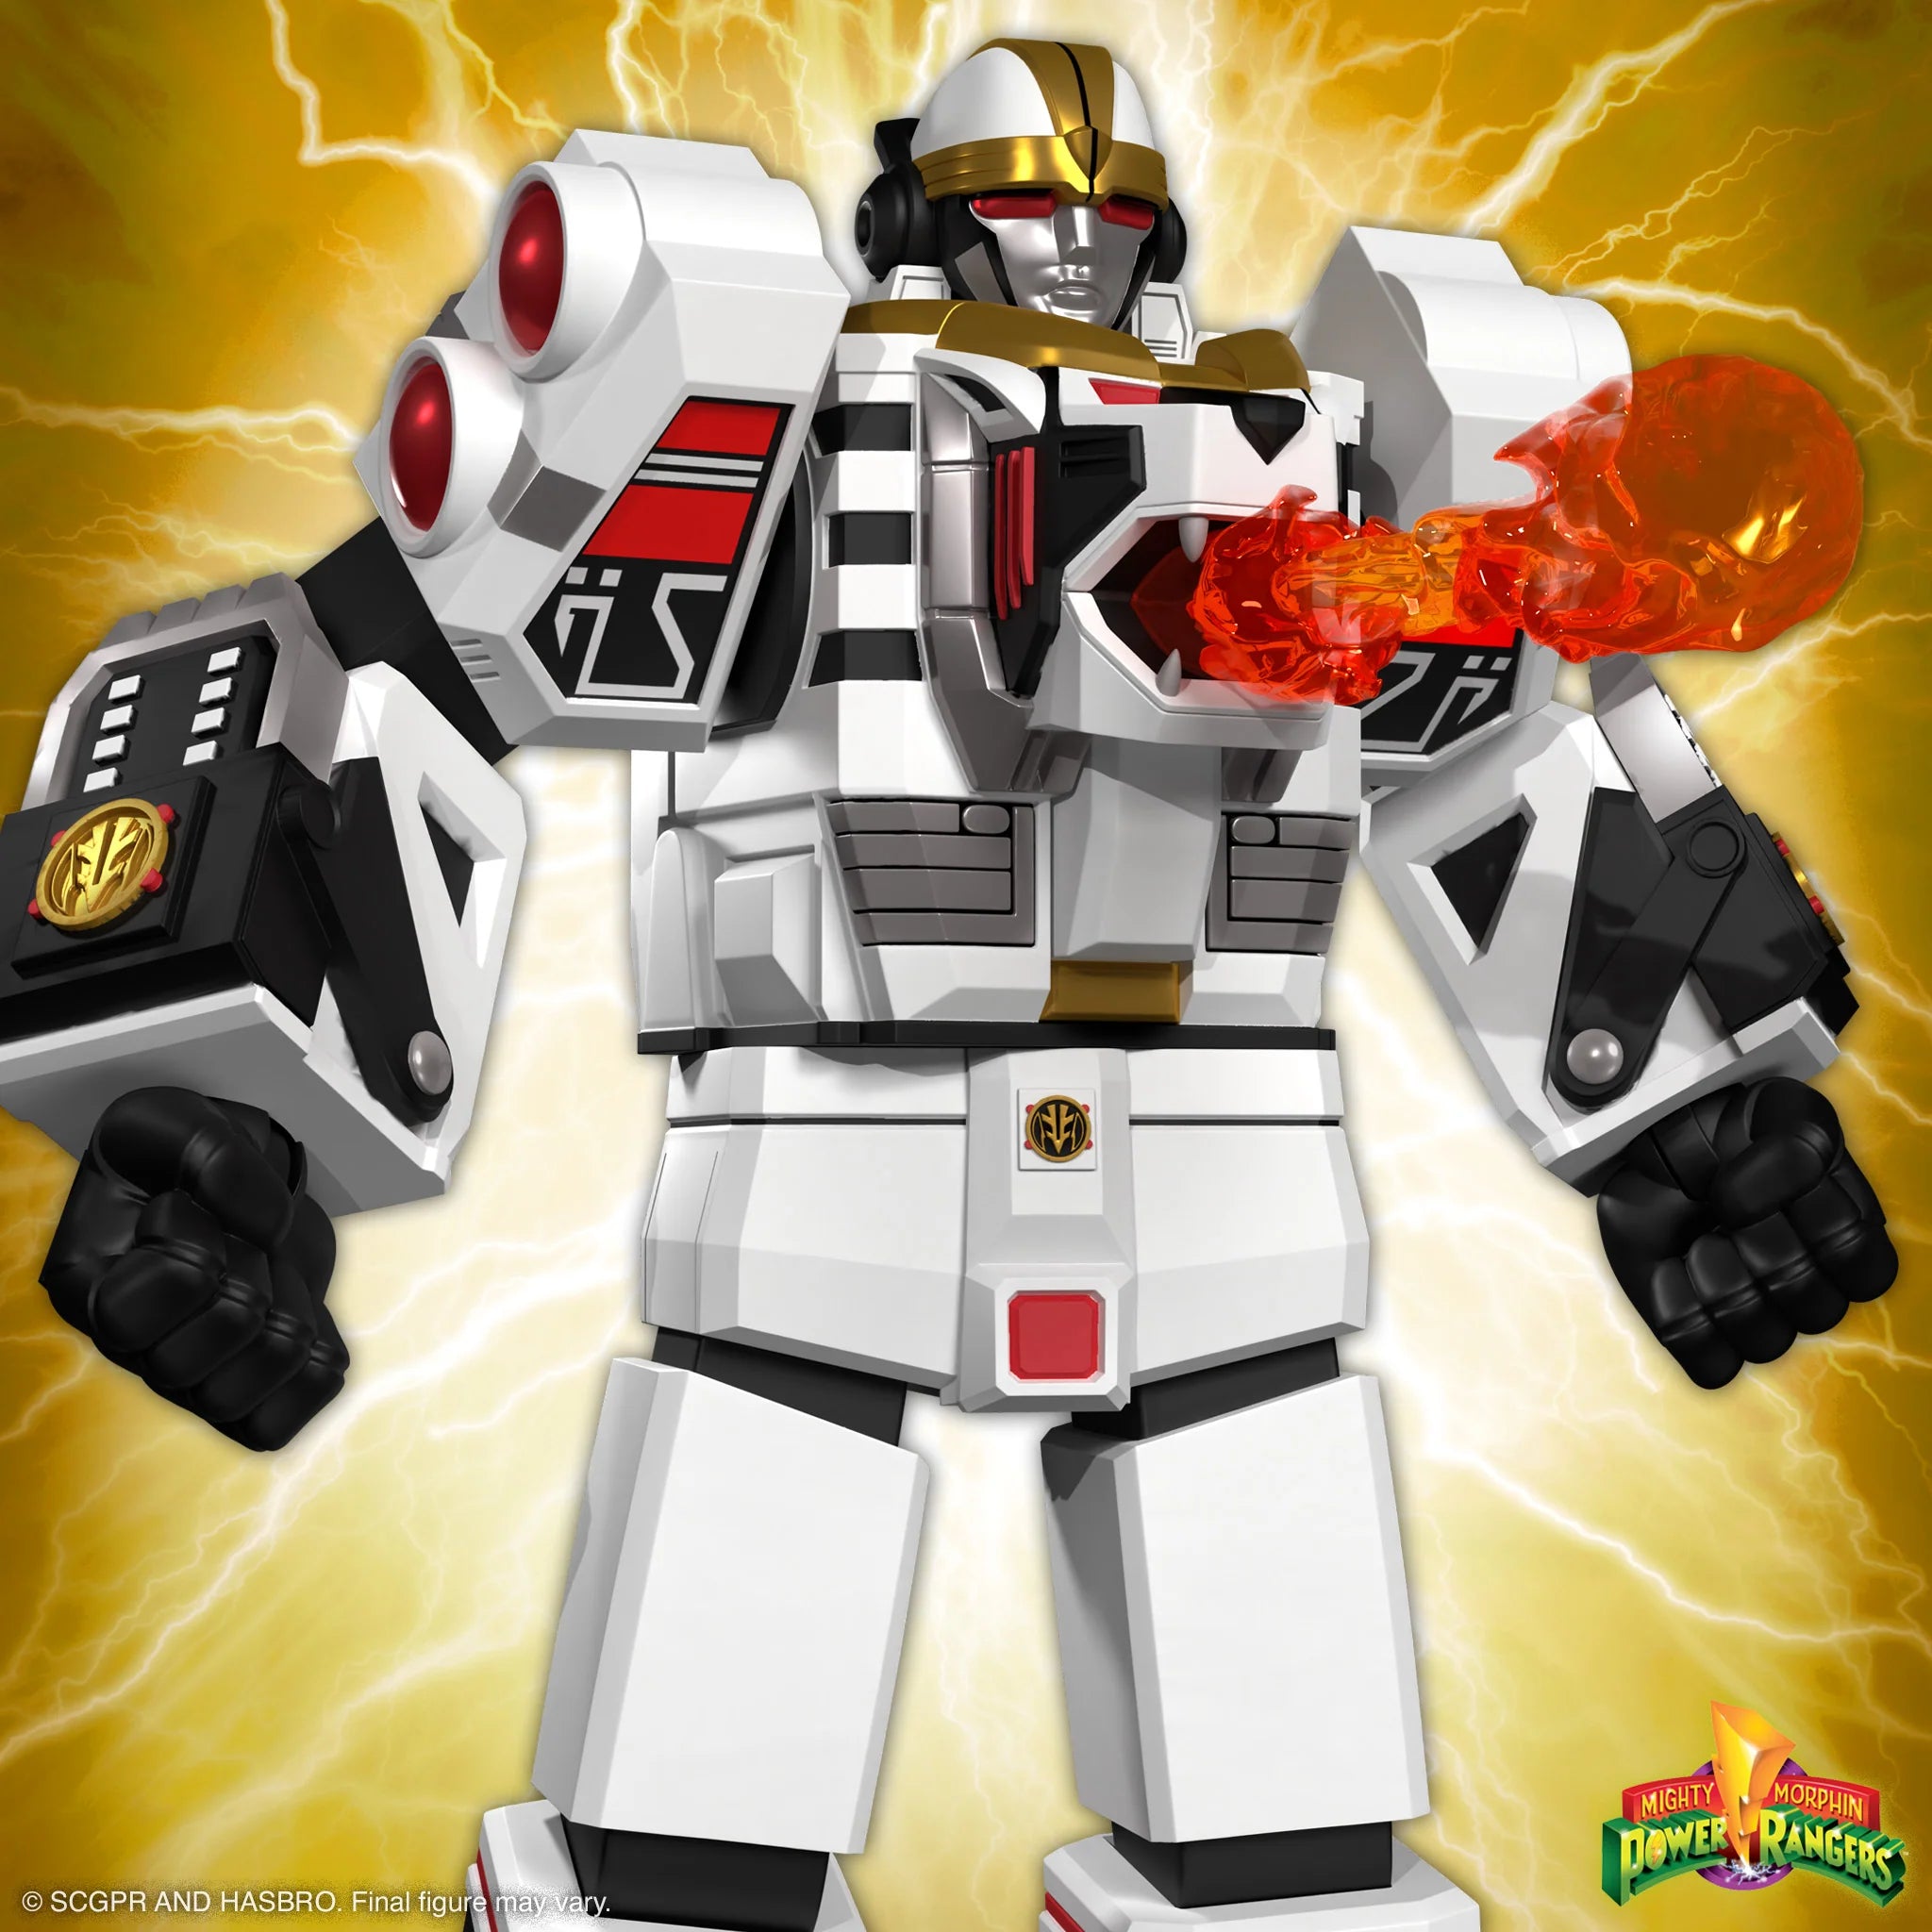 Super7 - Mighty Morphin Power Rangers ULTIMATES! - Wave 4 - White Tigerzord (Warrior Mode) - Marvelous Toys